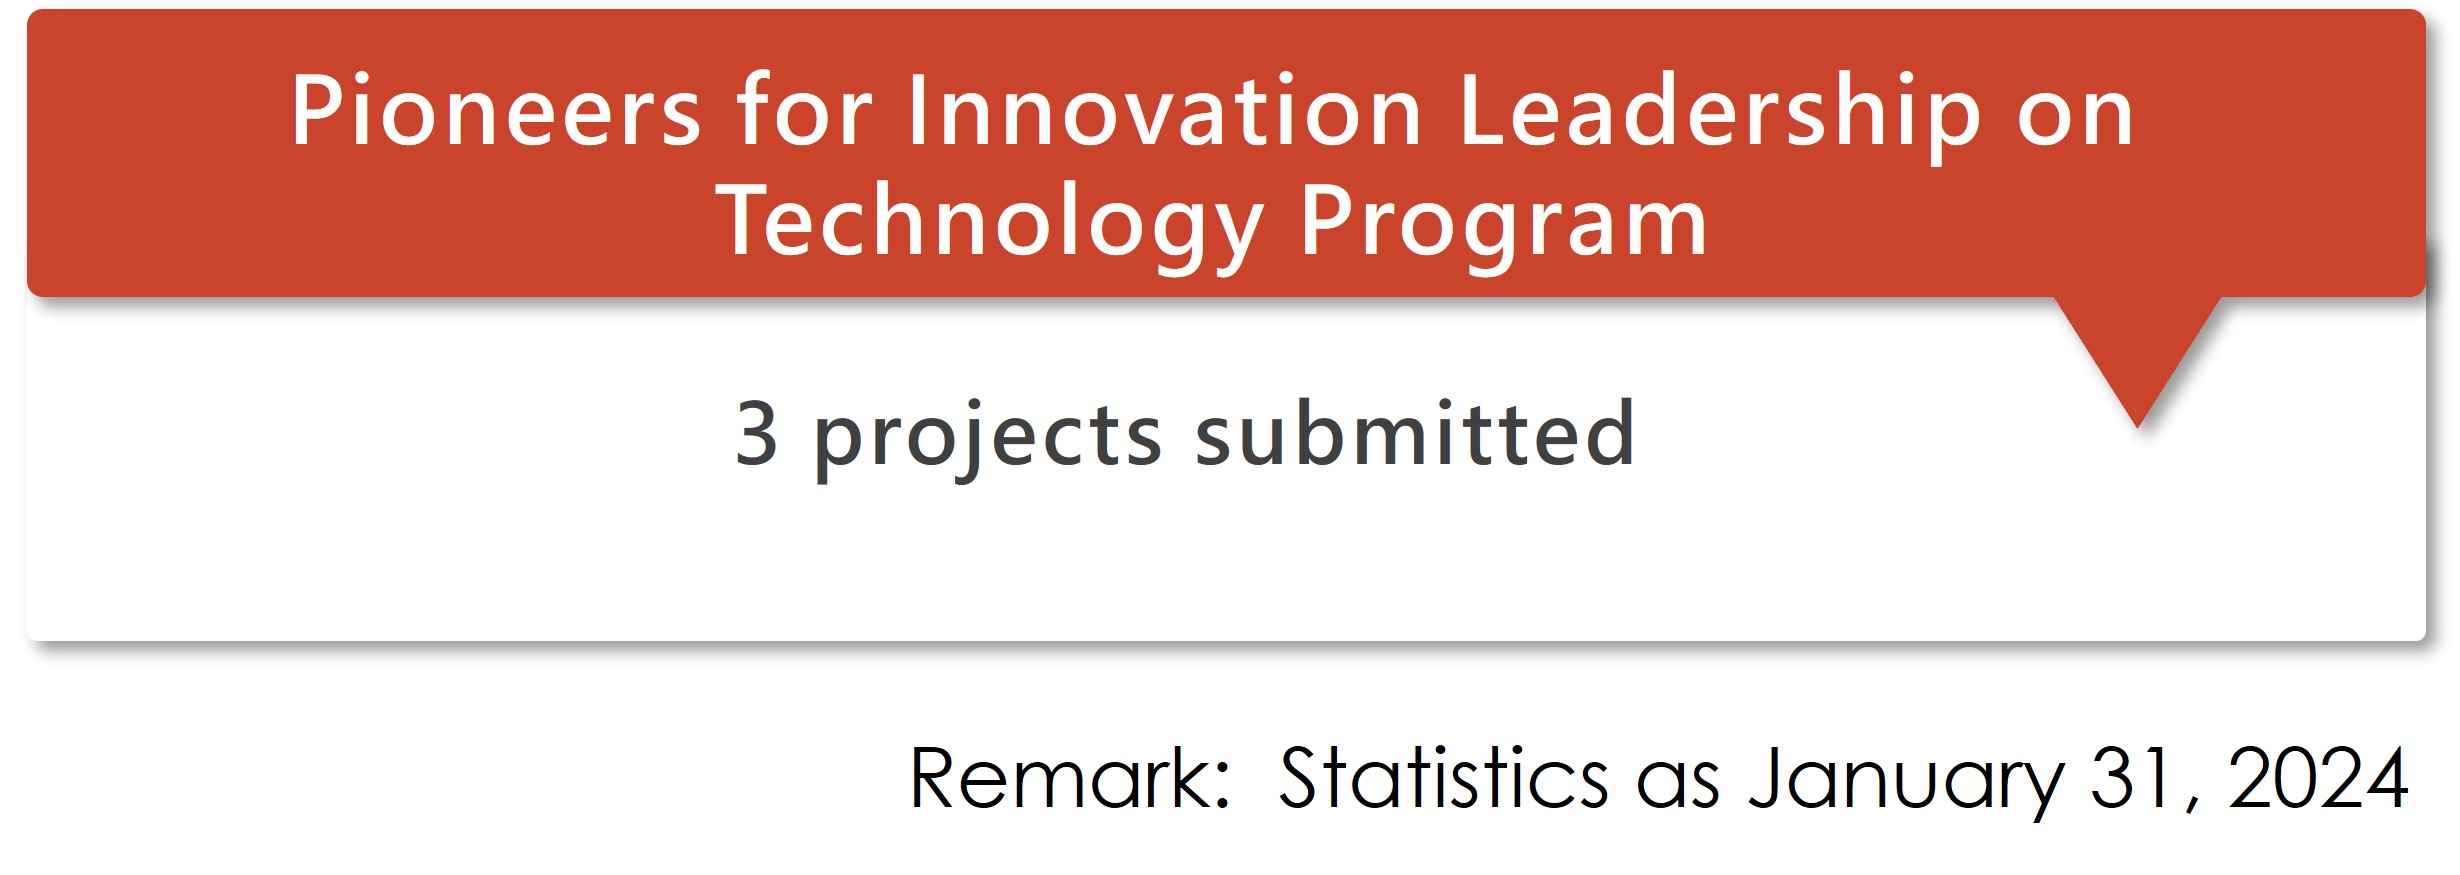 Achievement_Pioneers for Innovation Leadership on Technology Program